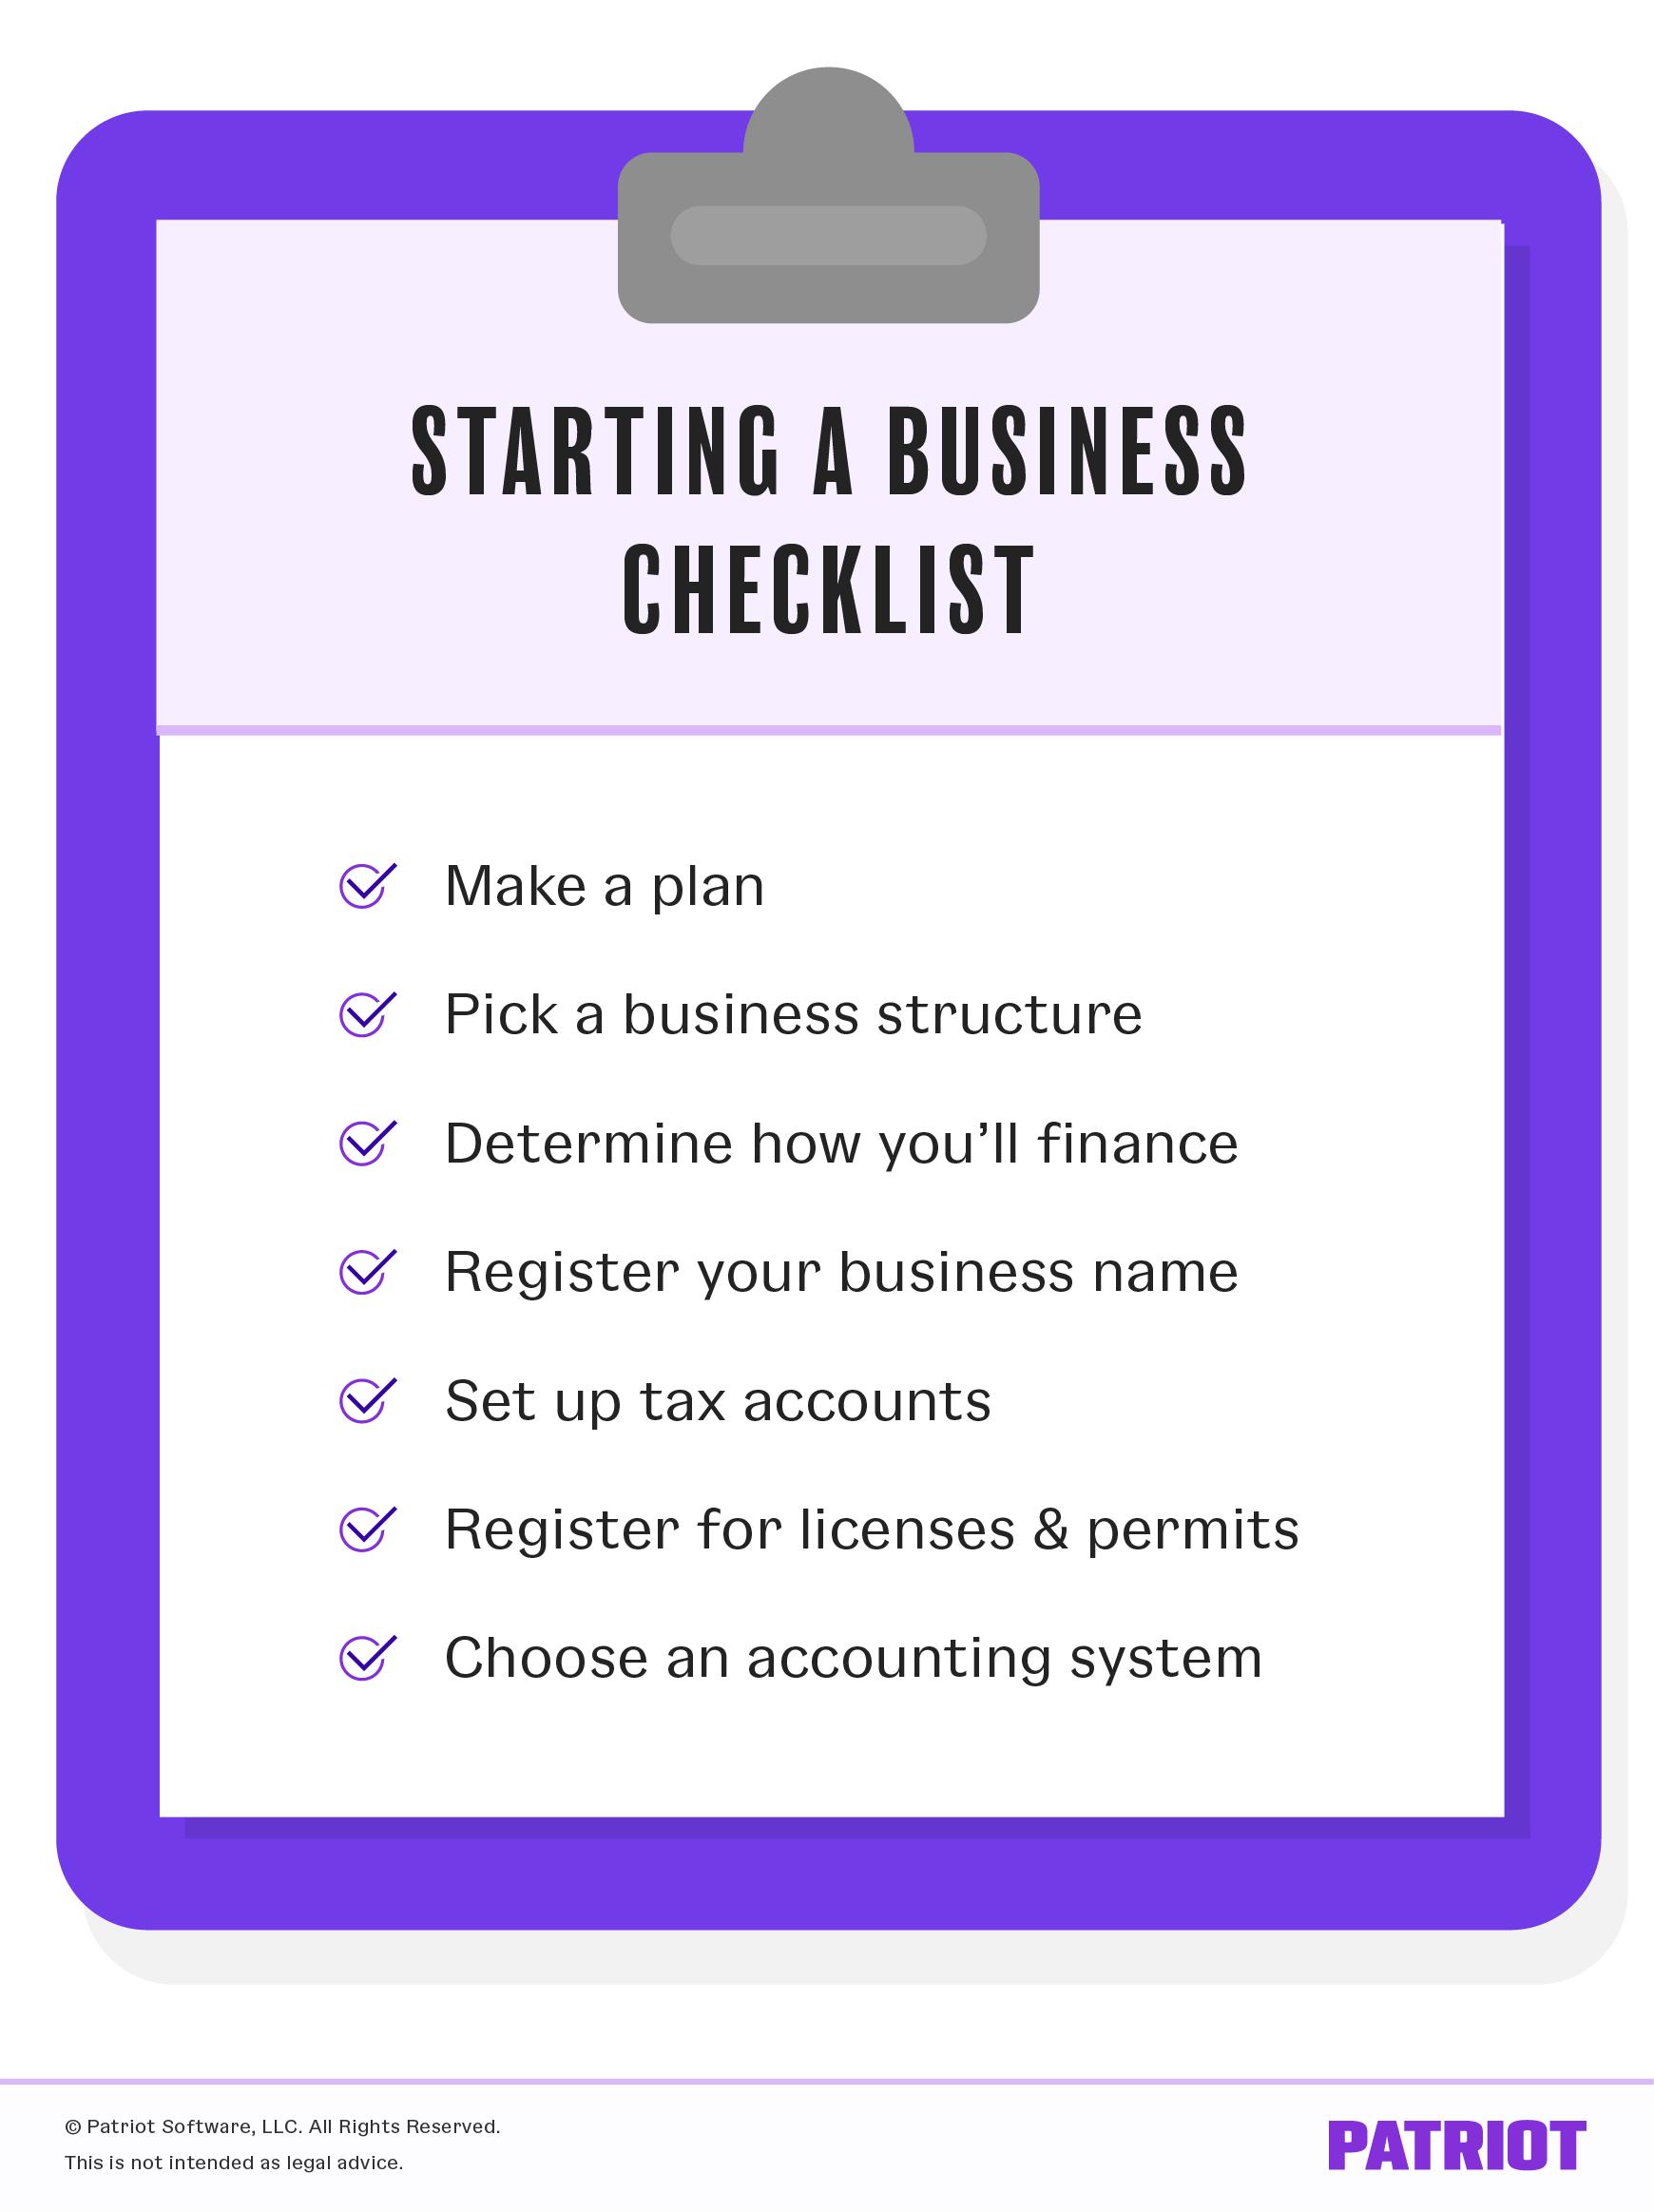 Starting a Business Checklist Steps for Steady Growth